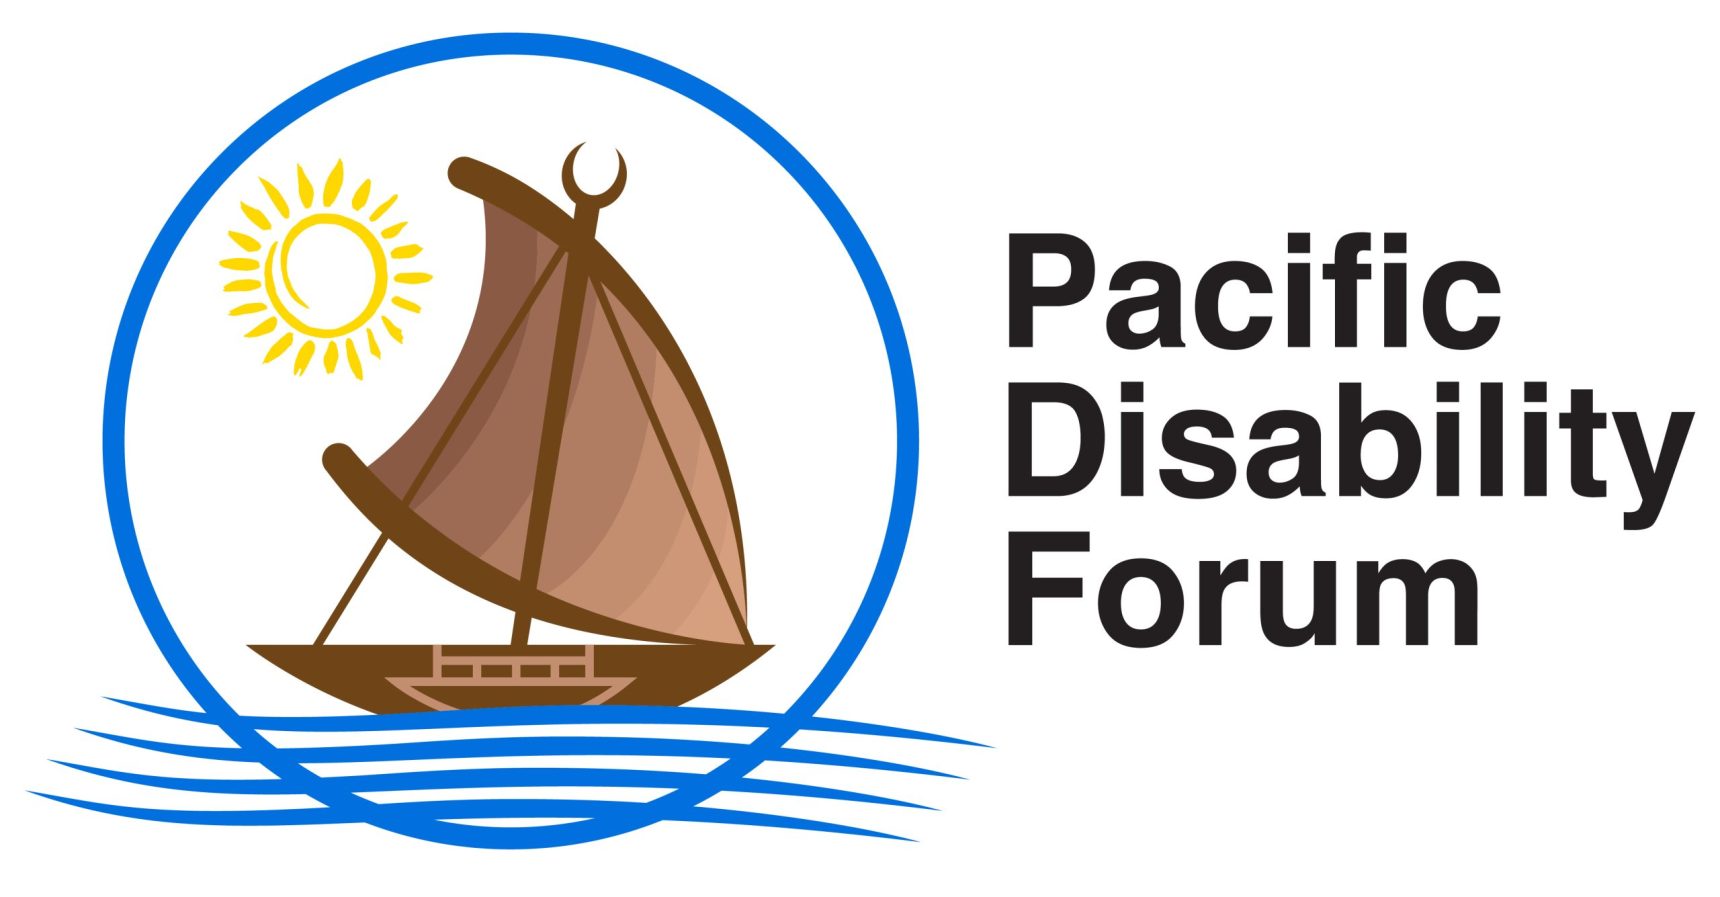 Pacific Disability Forum